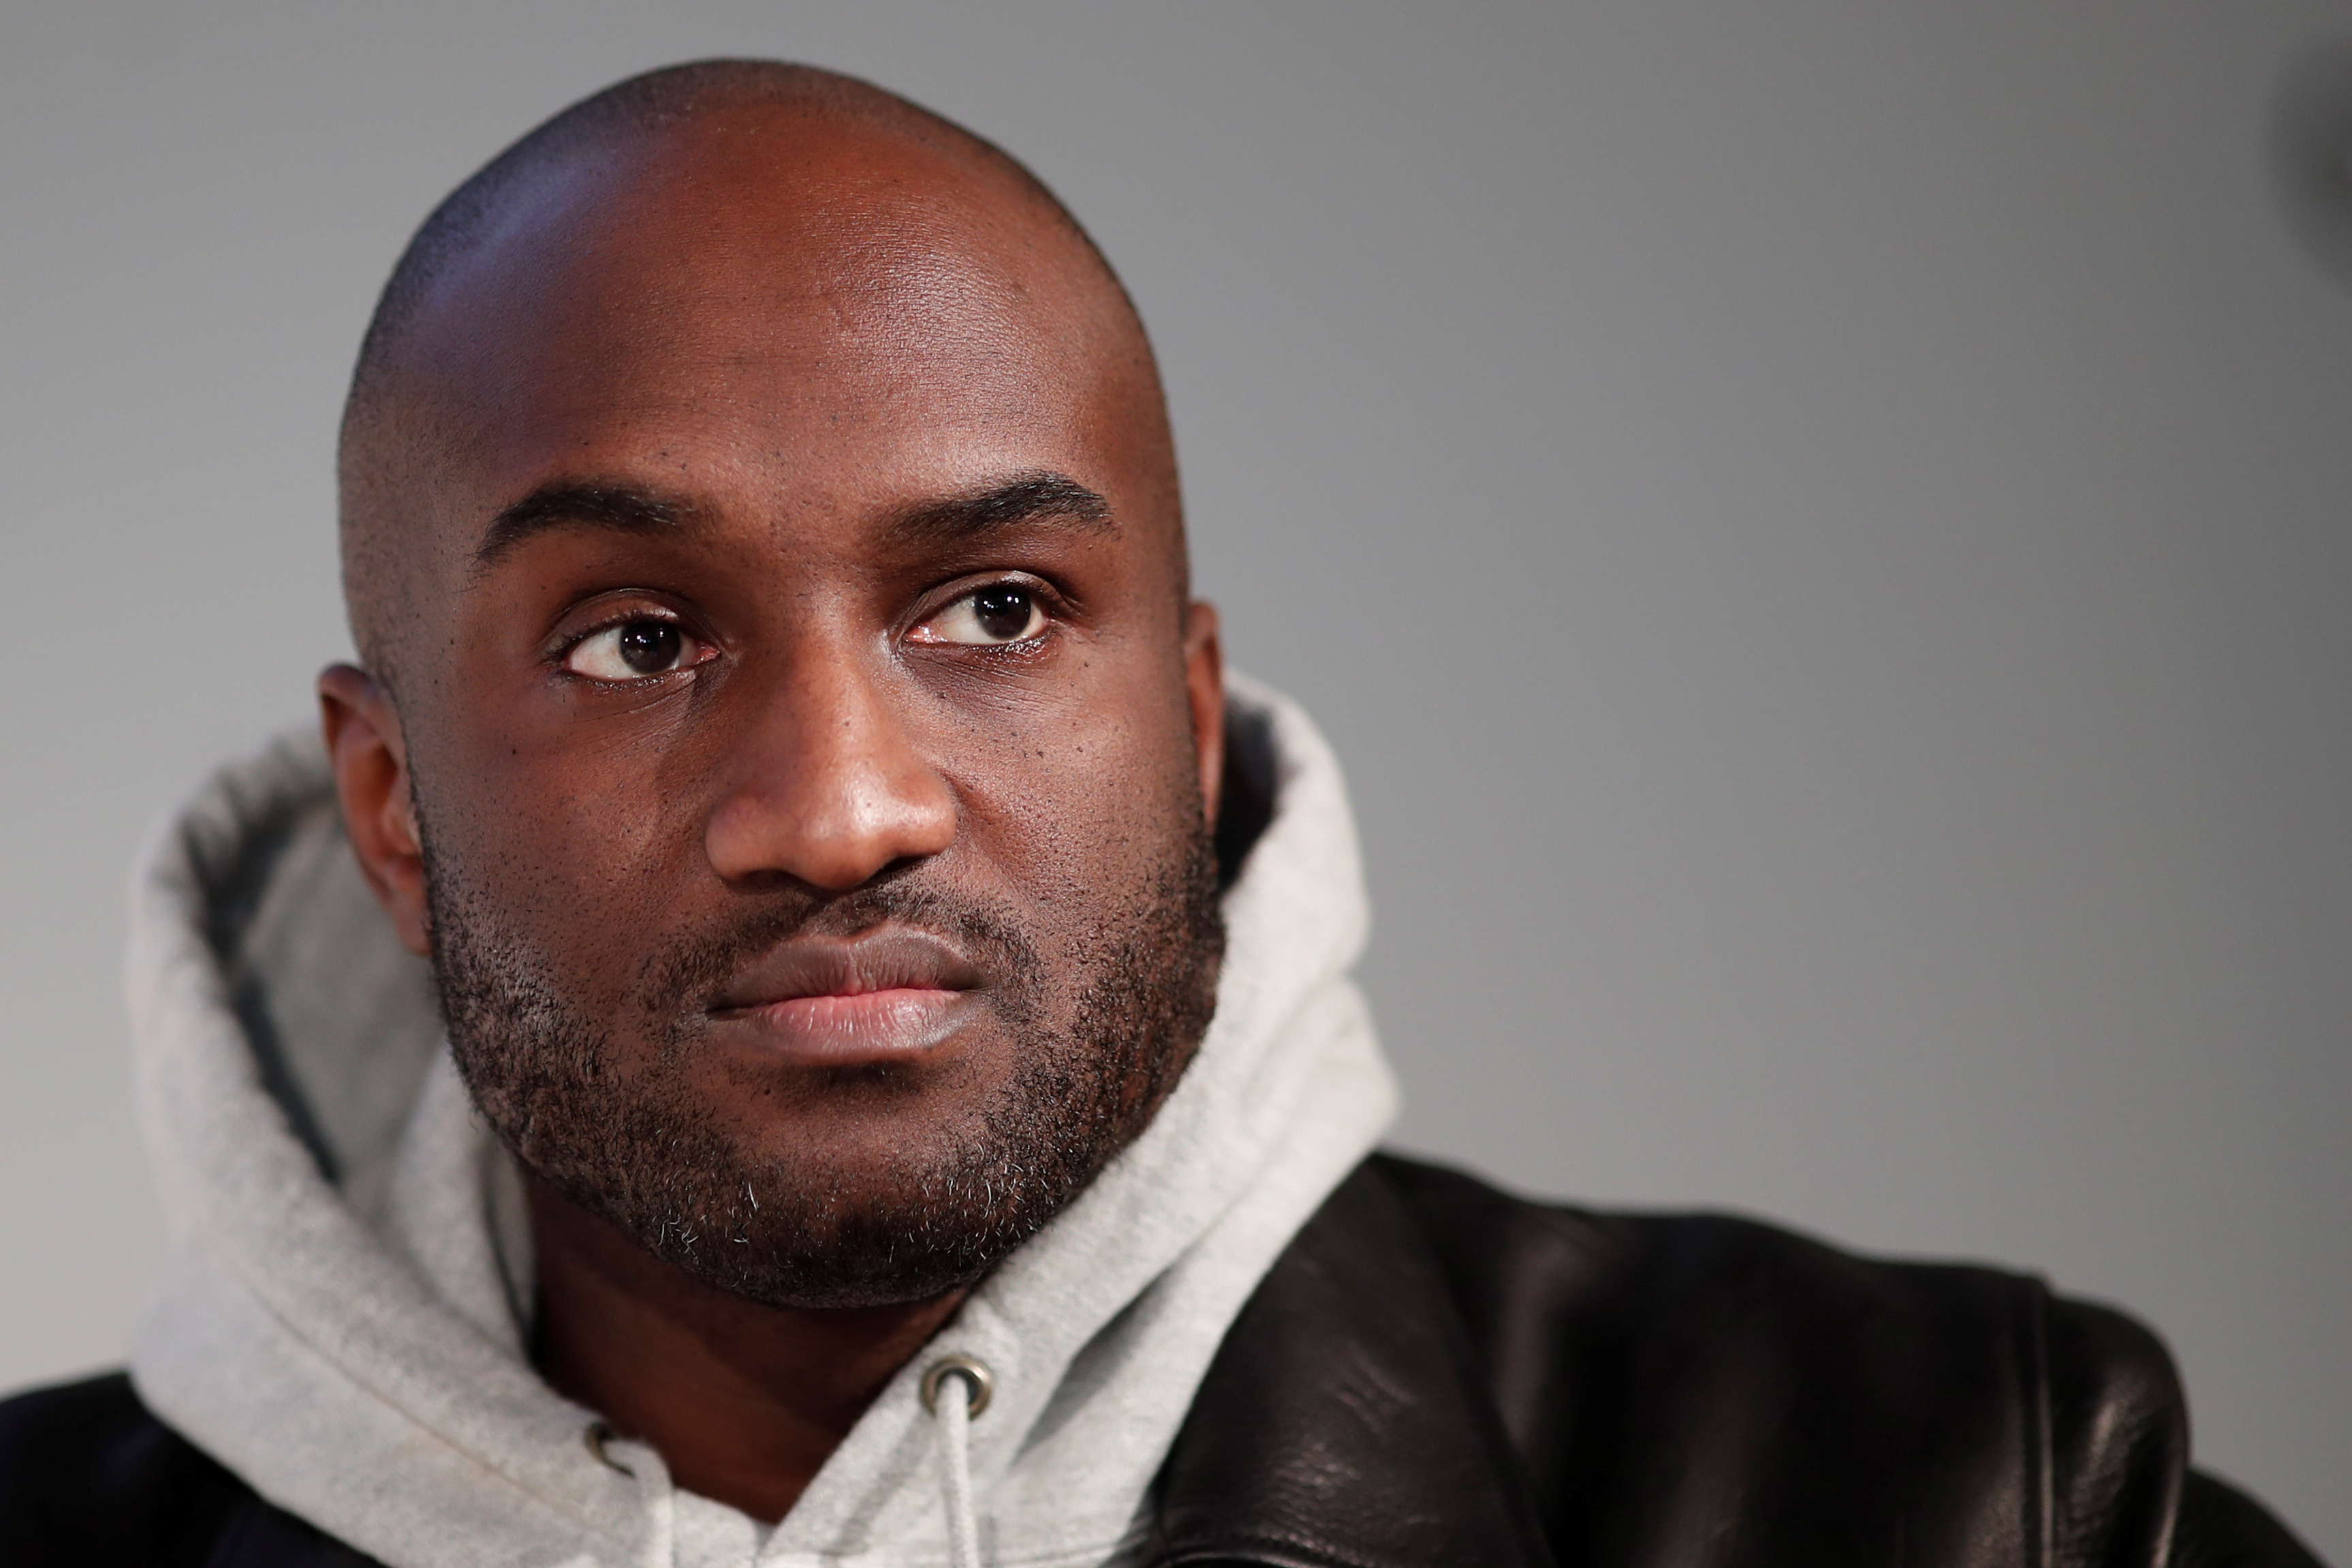 Virgil Abloh, Men's Artistic Director at Louis Vuitton, attends the 3rd edition of the Vogue Fashion Festival in Paris